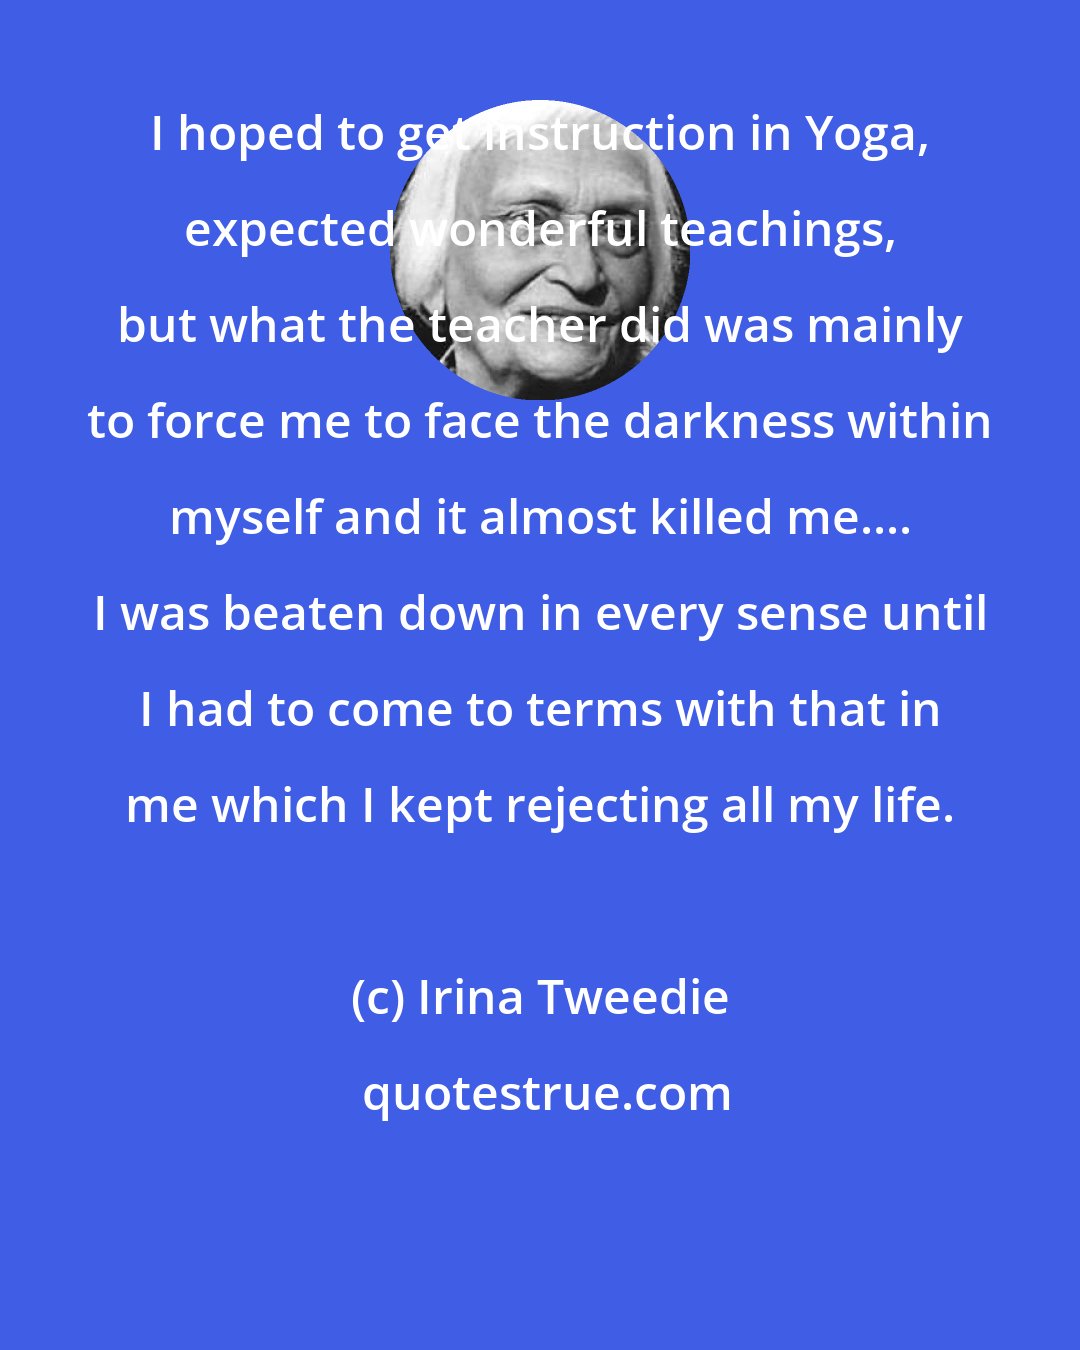 Irina Tweedie: I hoped to get instruction in Yoga, expected wonderful teachings, but what the teacher did was mainly to force me to face the darkness within myself and it almost killed me.... I was beaten down in every sense until I had to come to terms with that in me which I kept rejecting all my life.